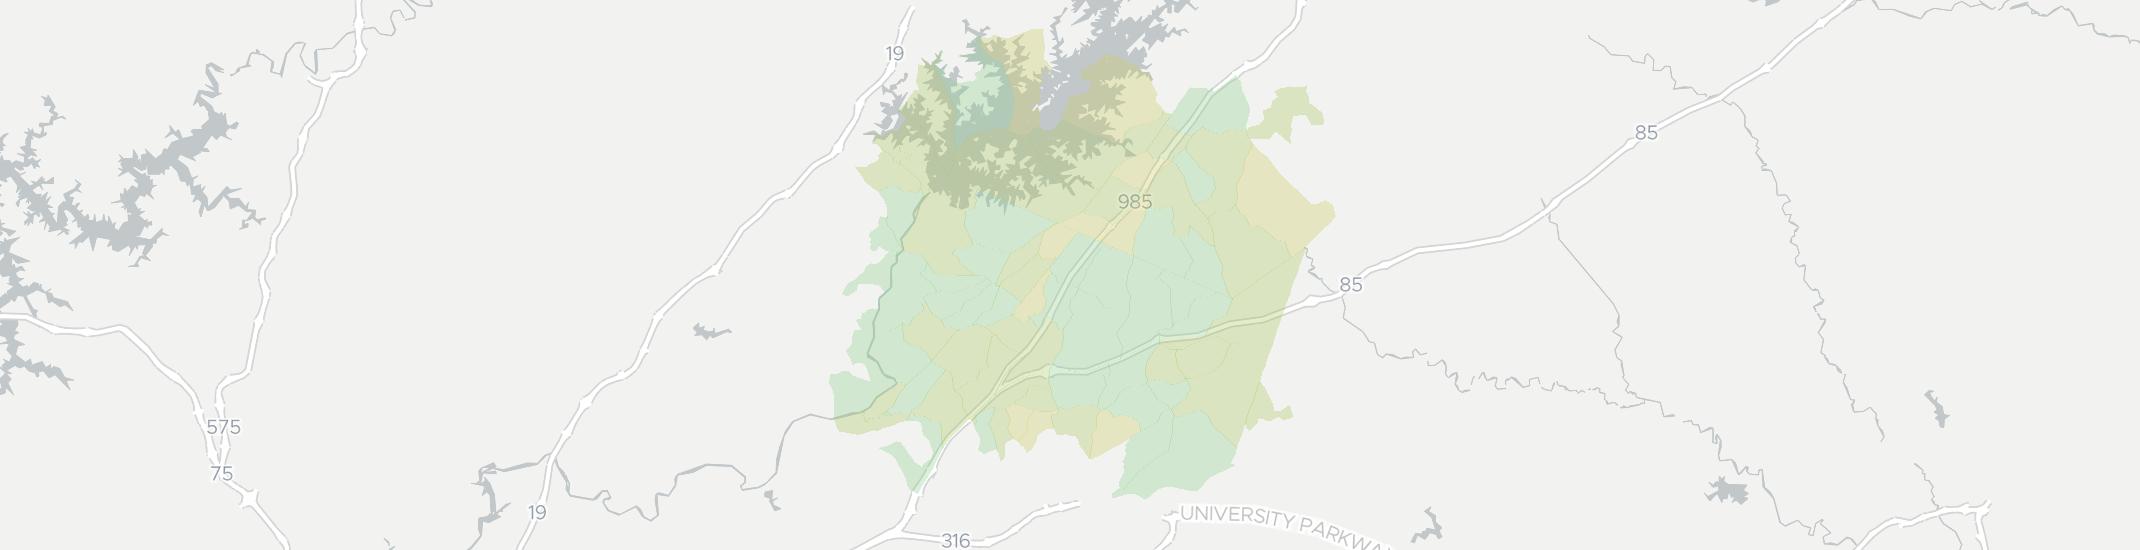 Buford Internet Competition Map. Click for interactive map.